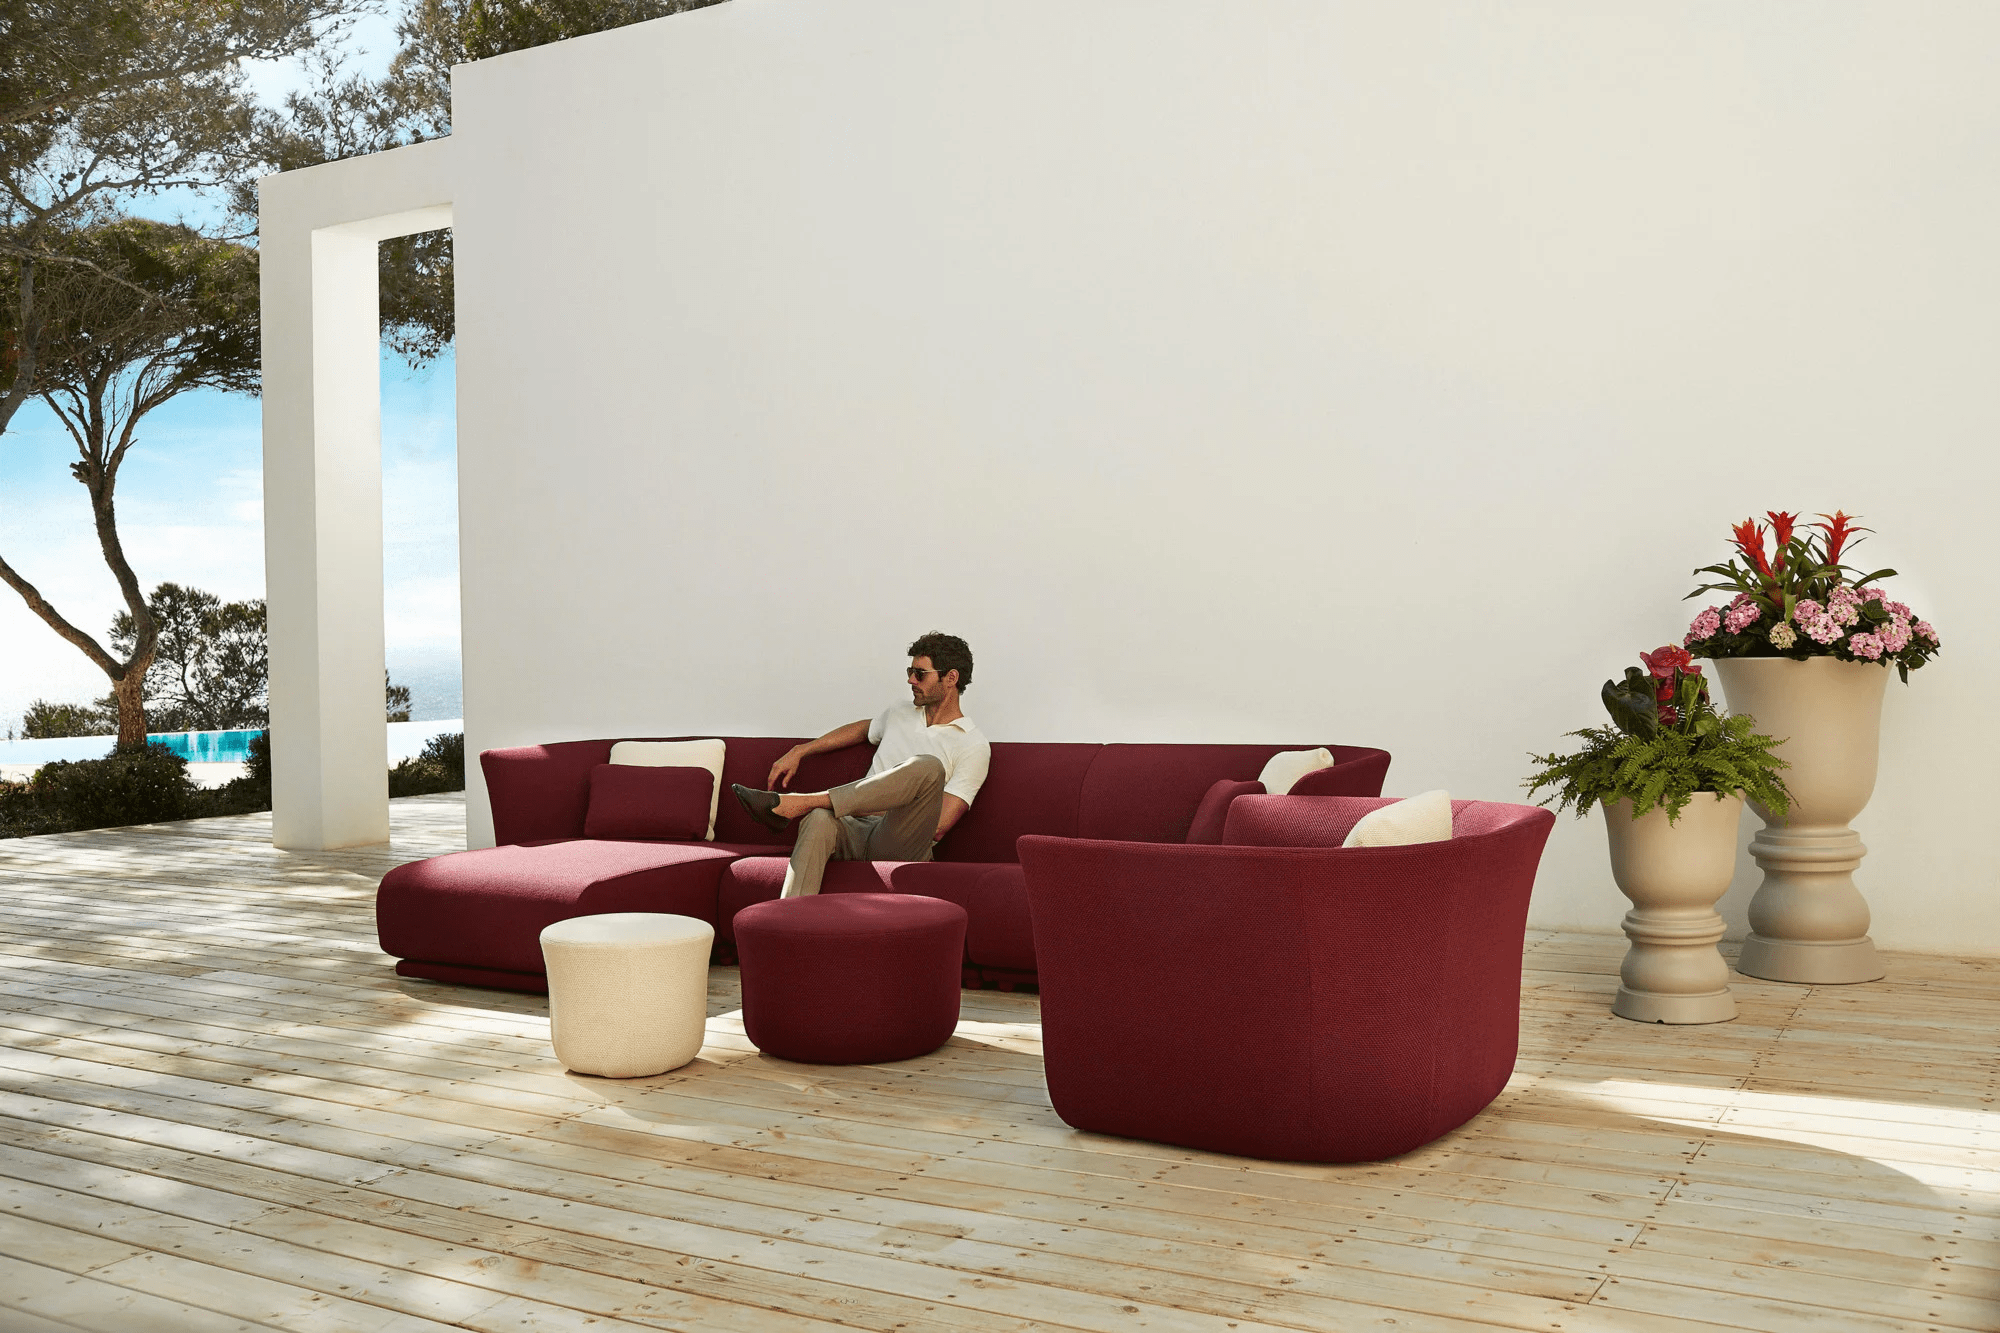 suave-collection-sofa-by-wanders-12-fam-g-arcit18